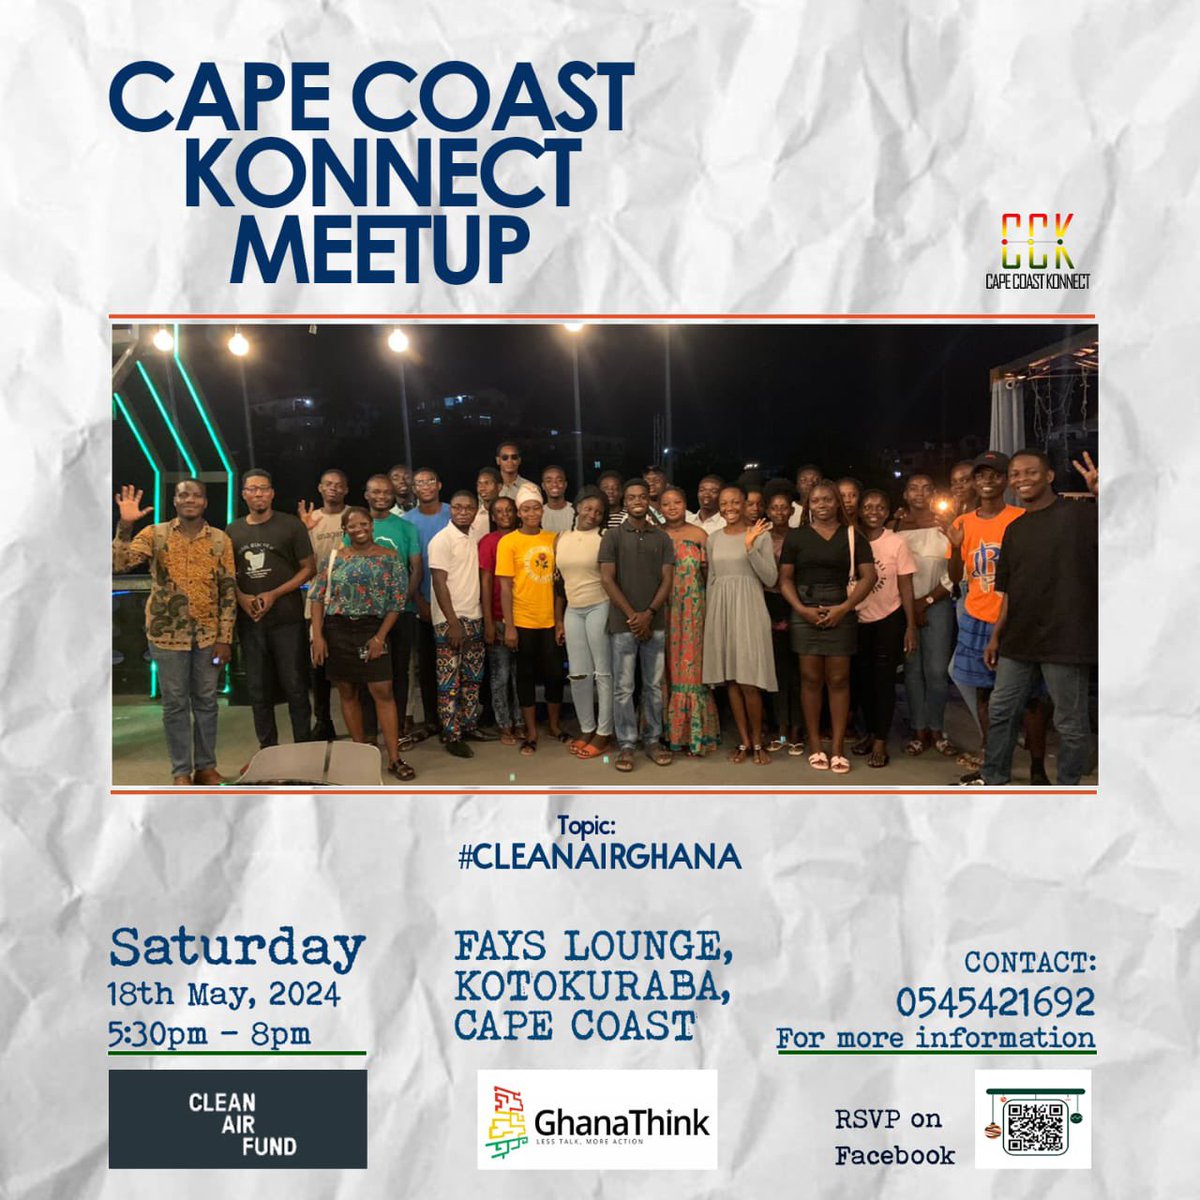 This month’s Konnect meetup comes off on Saturday, we will be discussing #cleanair as we strive to get good breathing environment😊
#cleanairforall 
#cleanair 
#cleanairfund
#bccapecoast